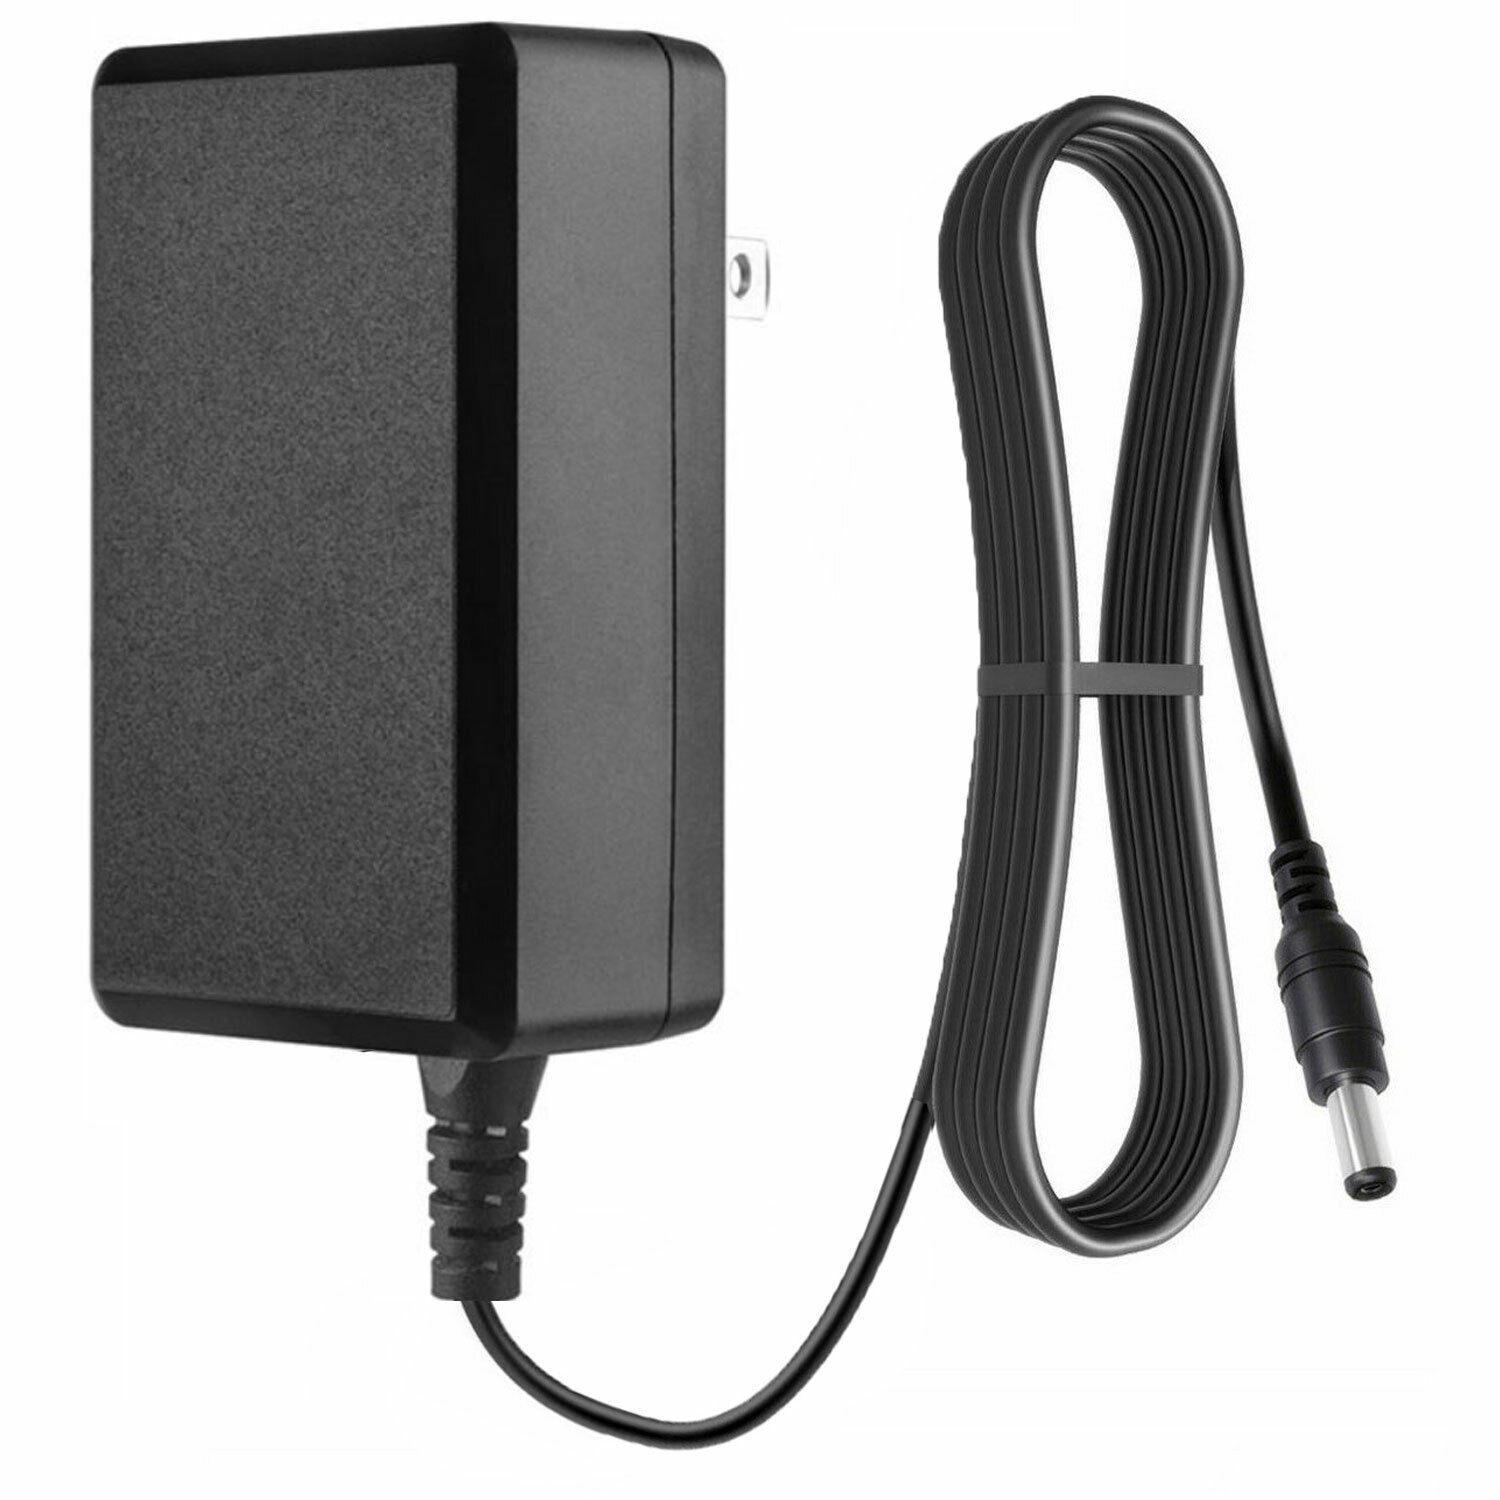 AC Adapter DC Charger for Capello CB350 Wireless Speaker Power Cord Supply PSU Technical Specifications: Construction: